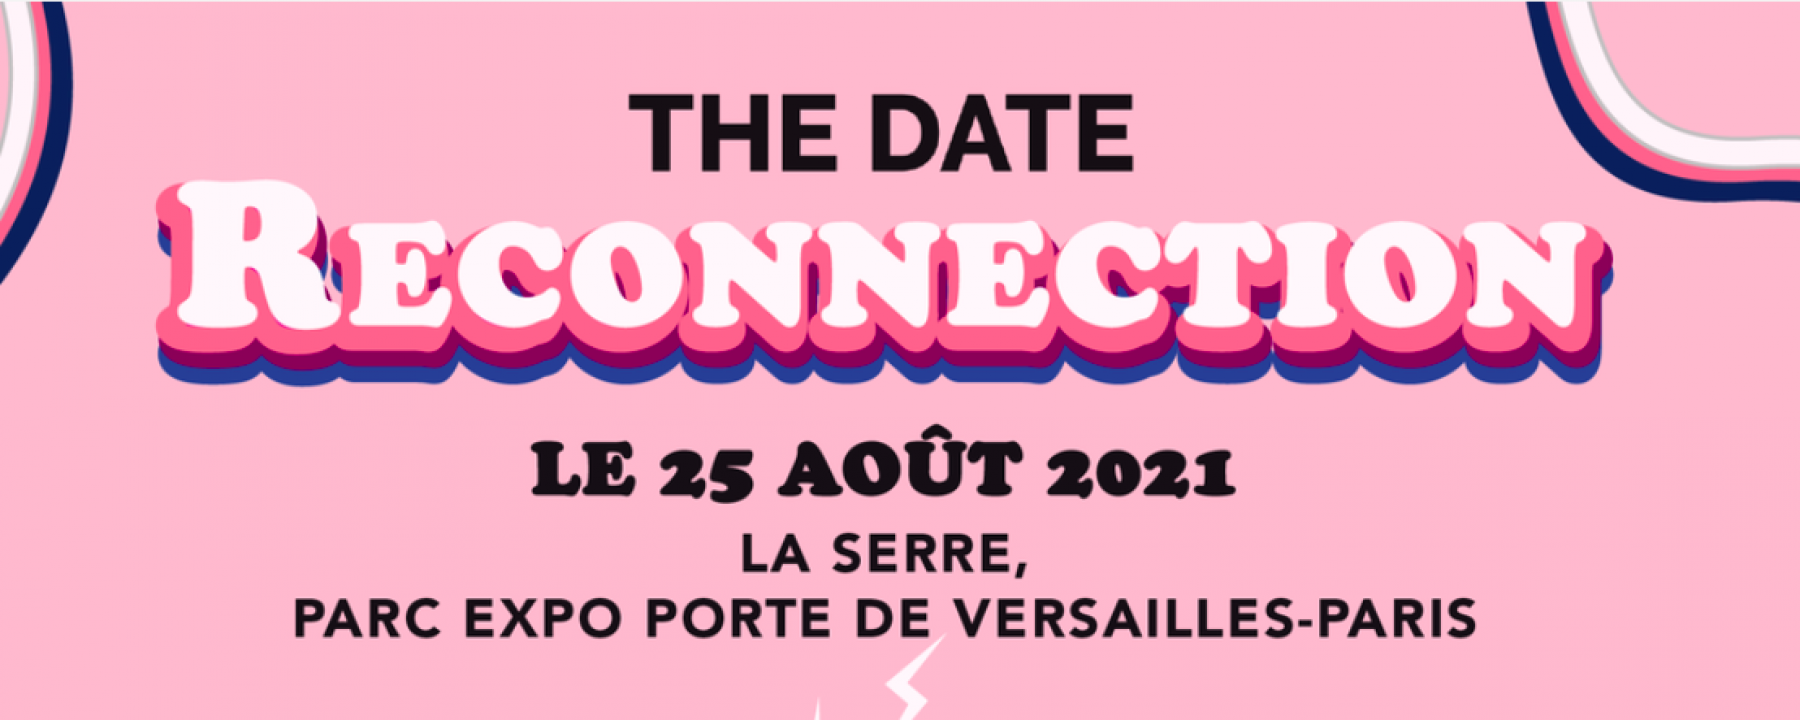 The Date Reconnection 25 aout 2021